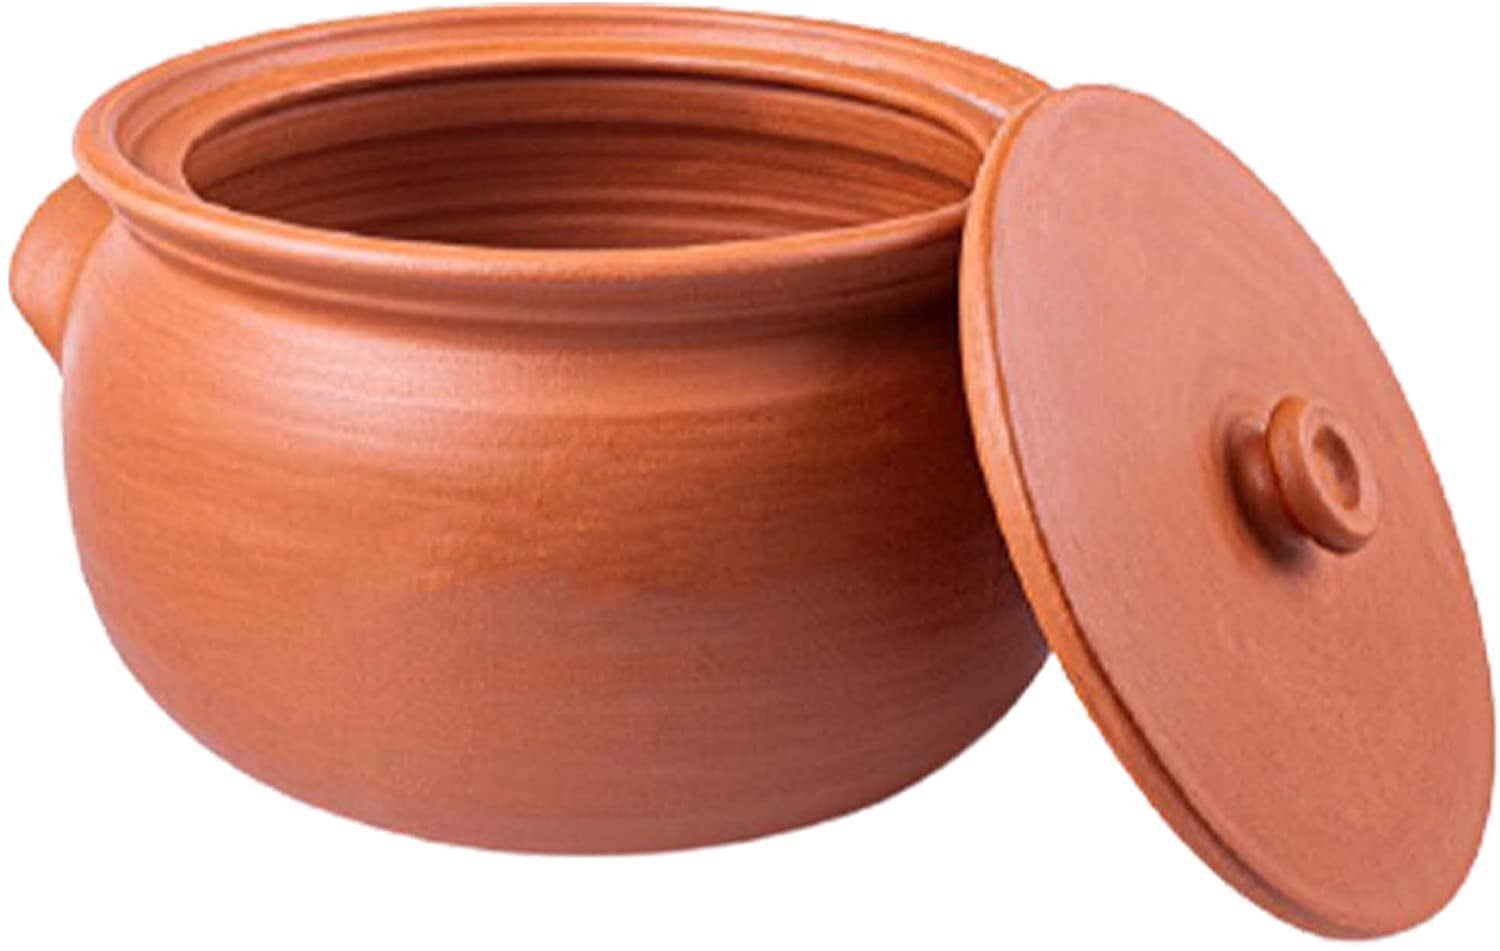 Clay Pot Cooking Pan, Multi-Cooking, 100% Pure-Clay